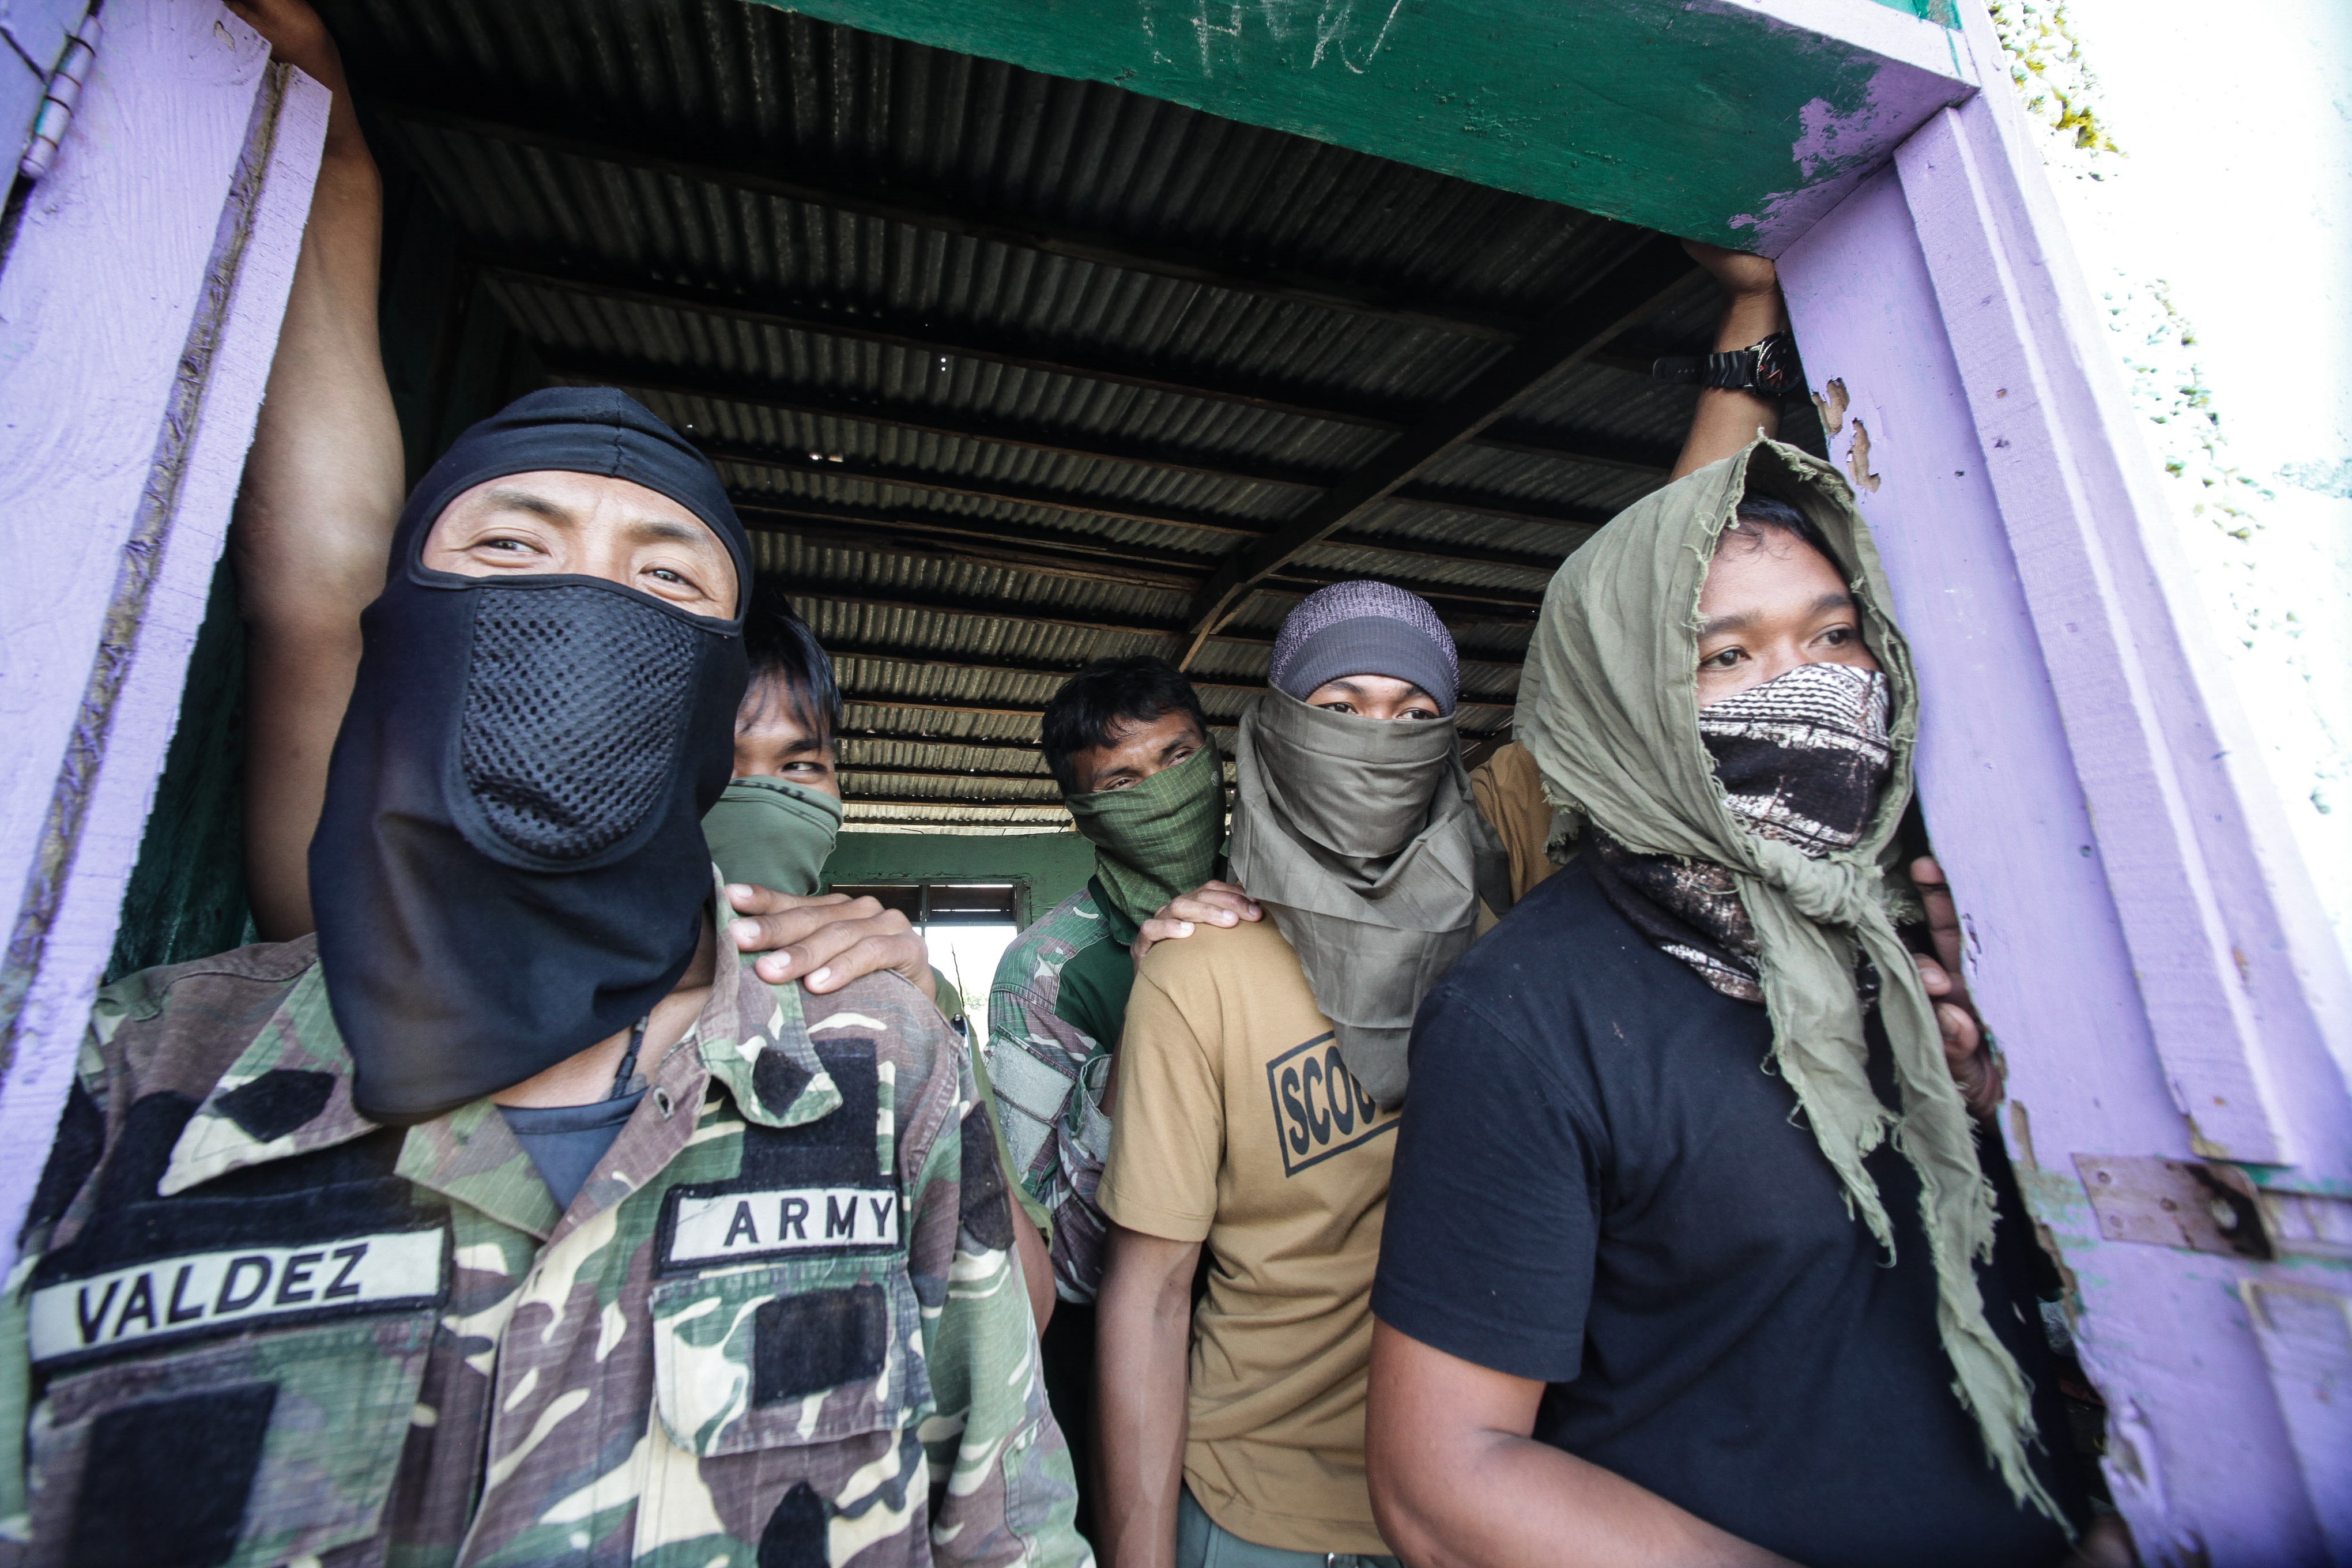 Philippine army soldiers stage a counterterrorism operation against Maute terrorists, who are allegedly linked with ISIS, in  Butig, the Philippine province of Lanao Del Sur, in Mindanao Island, on March 1, 2016 (Anadolu Agency/Getty Images)